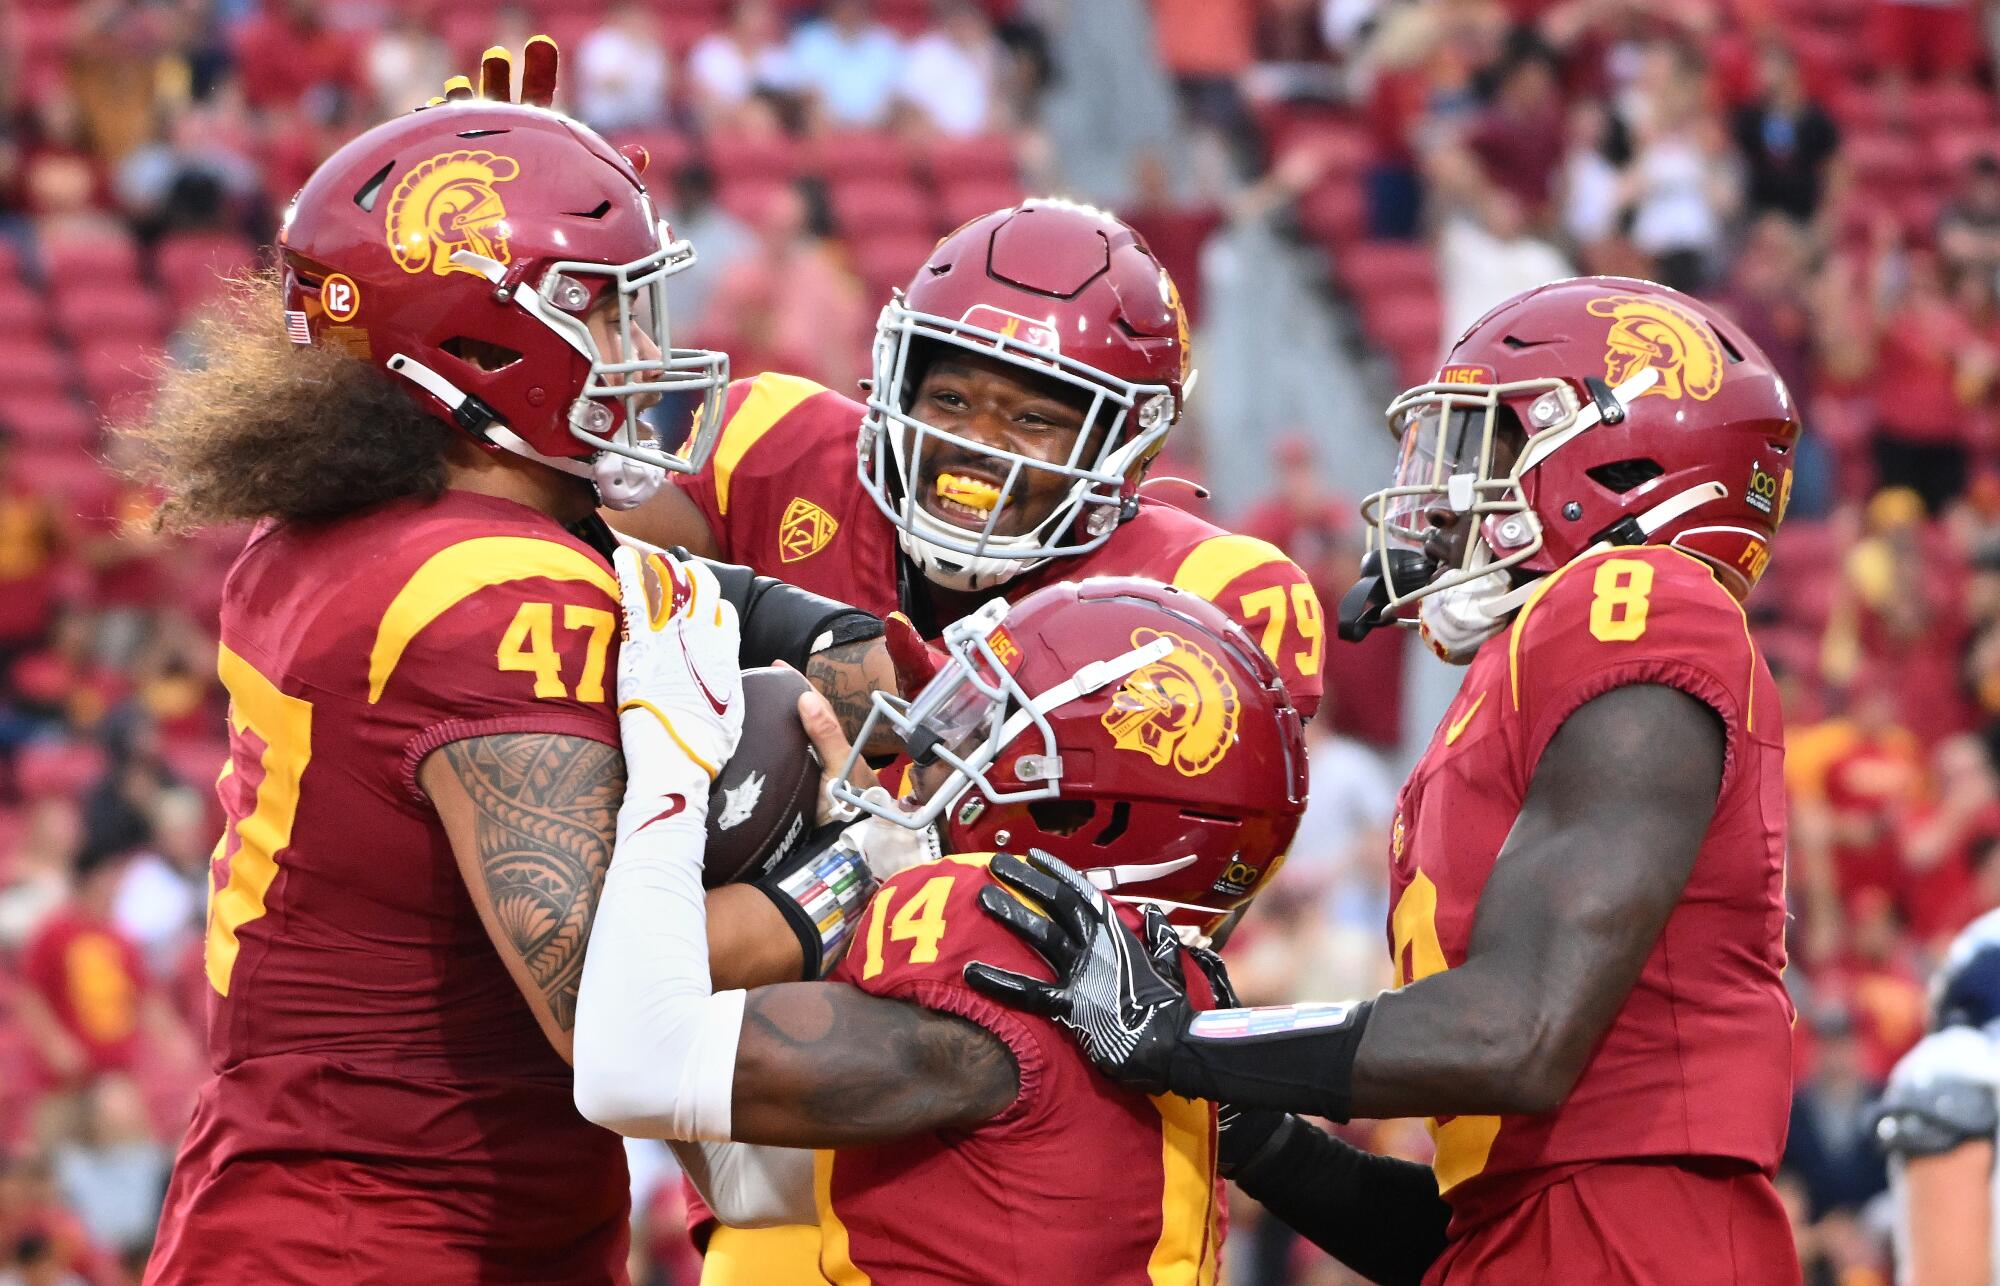 USC players celebrate during the game